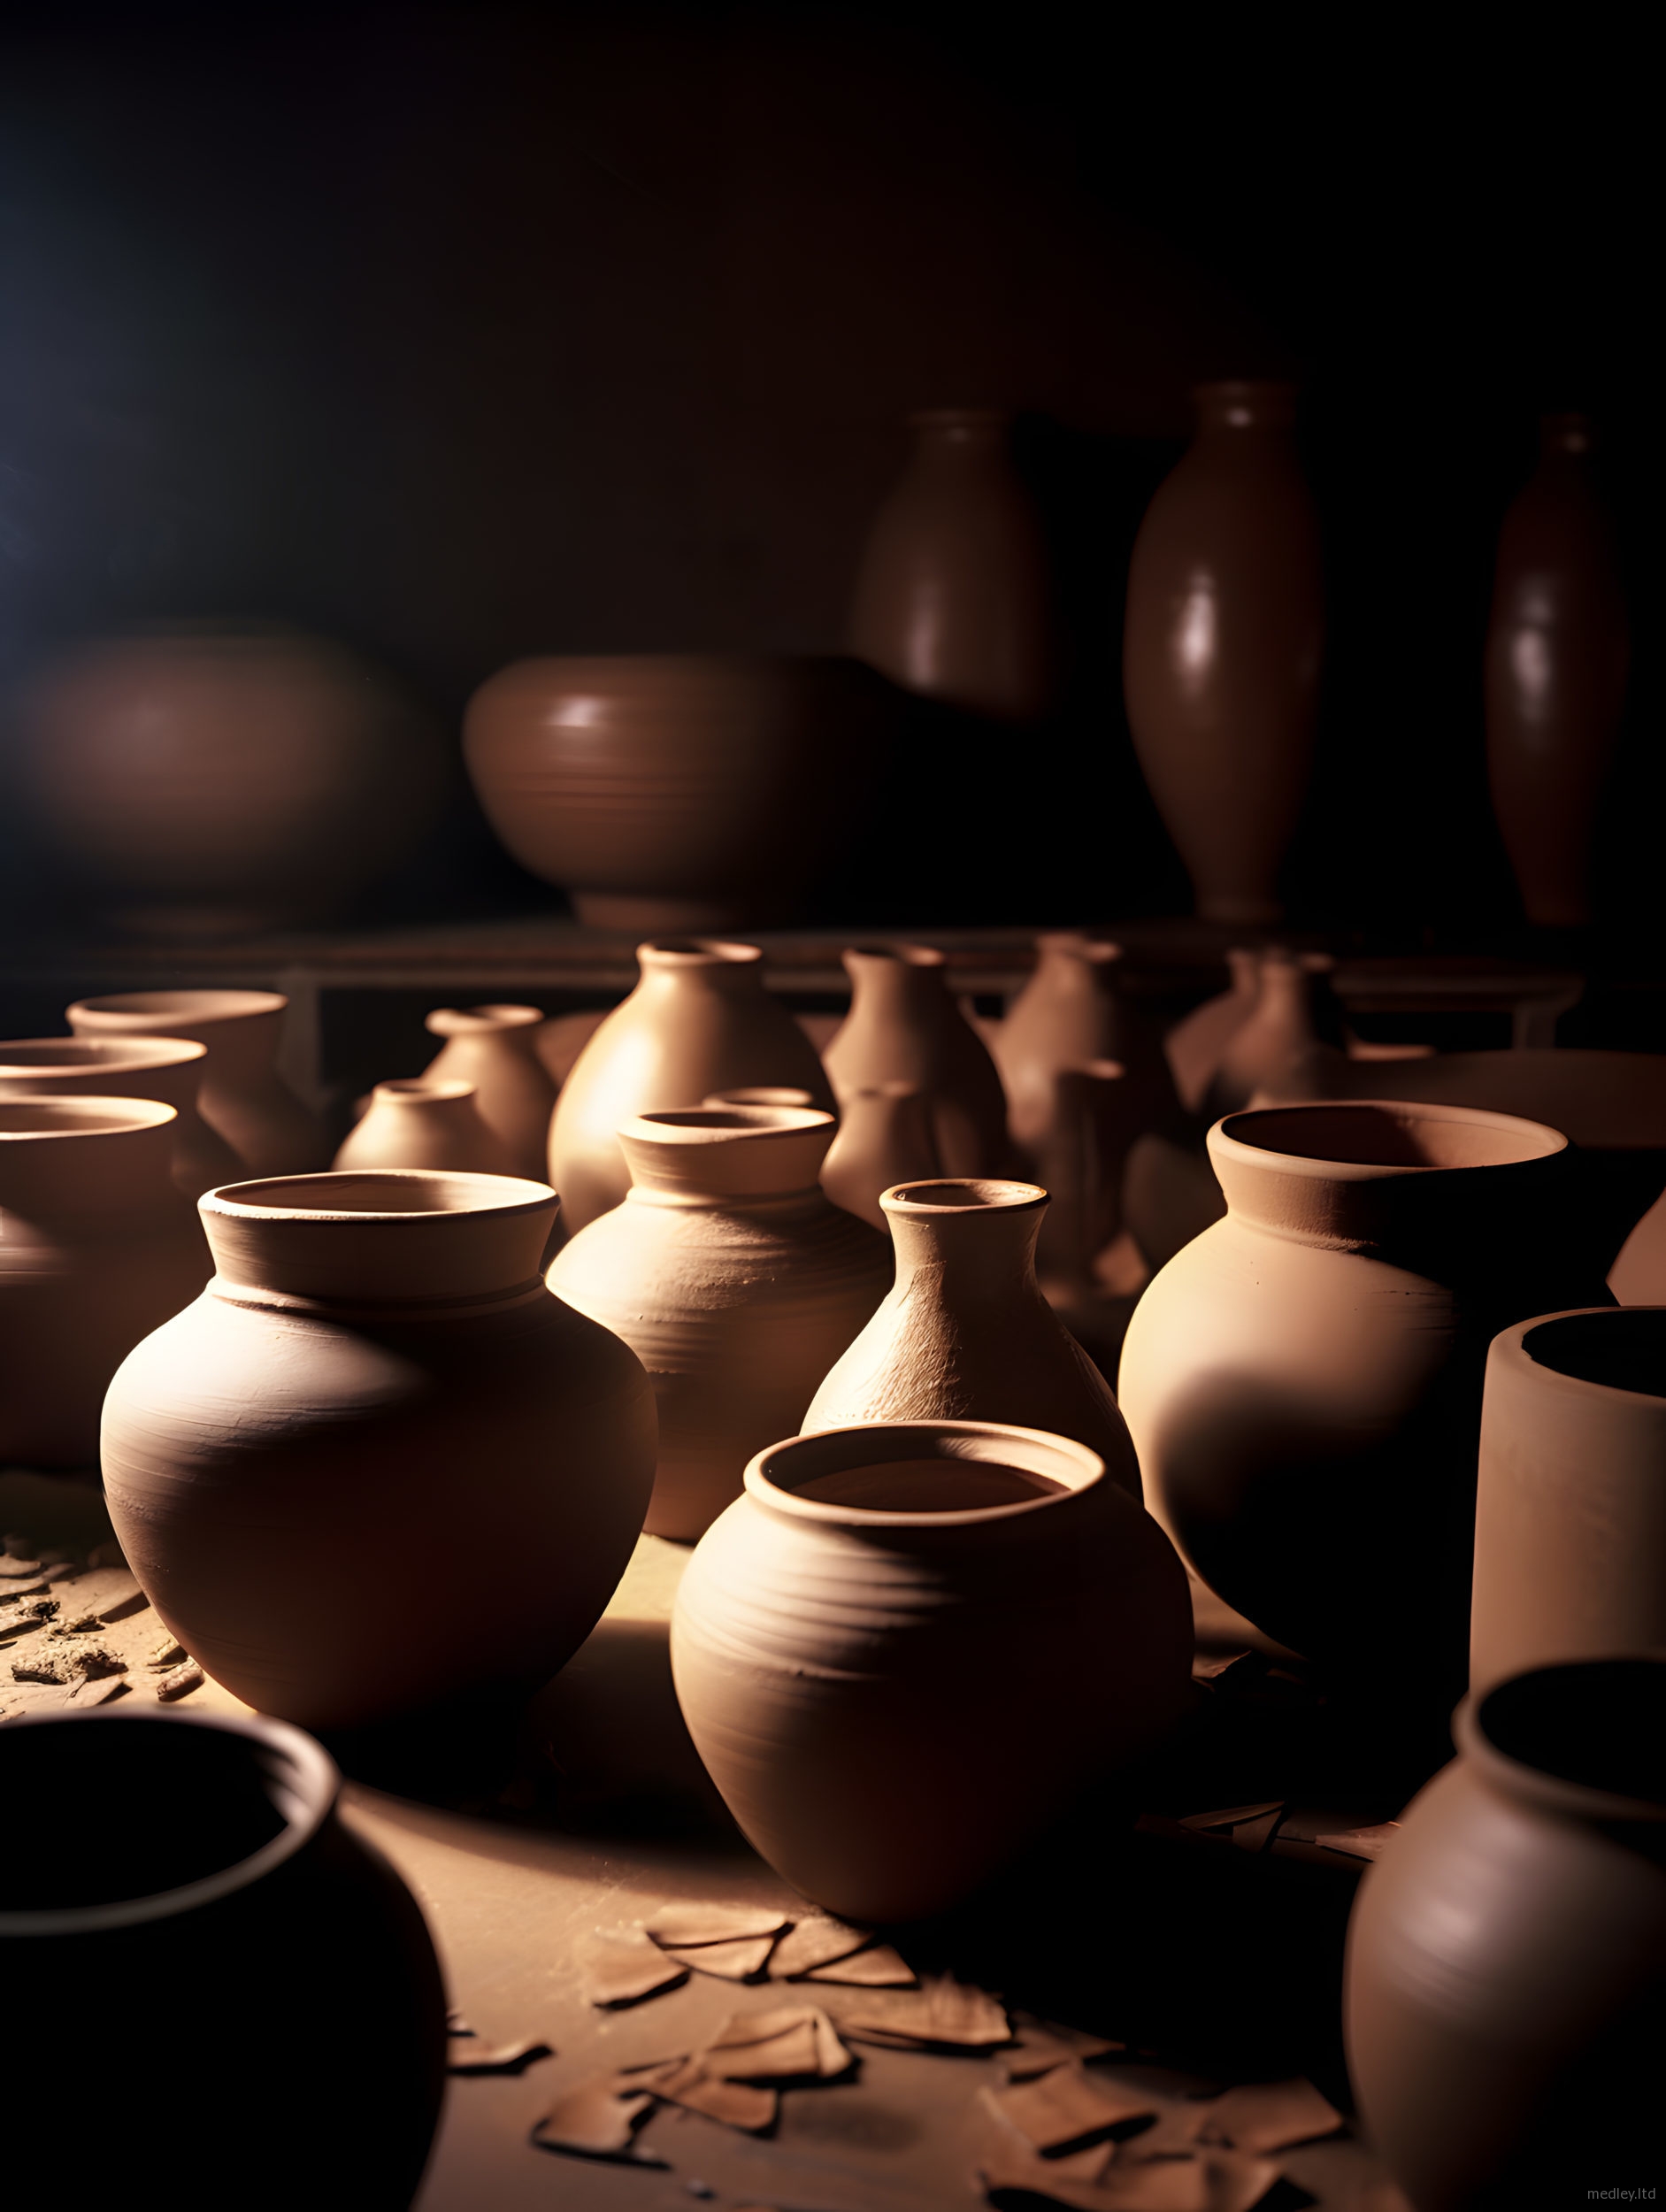 Textured clay pottery captured in striking shadows